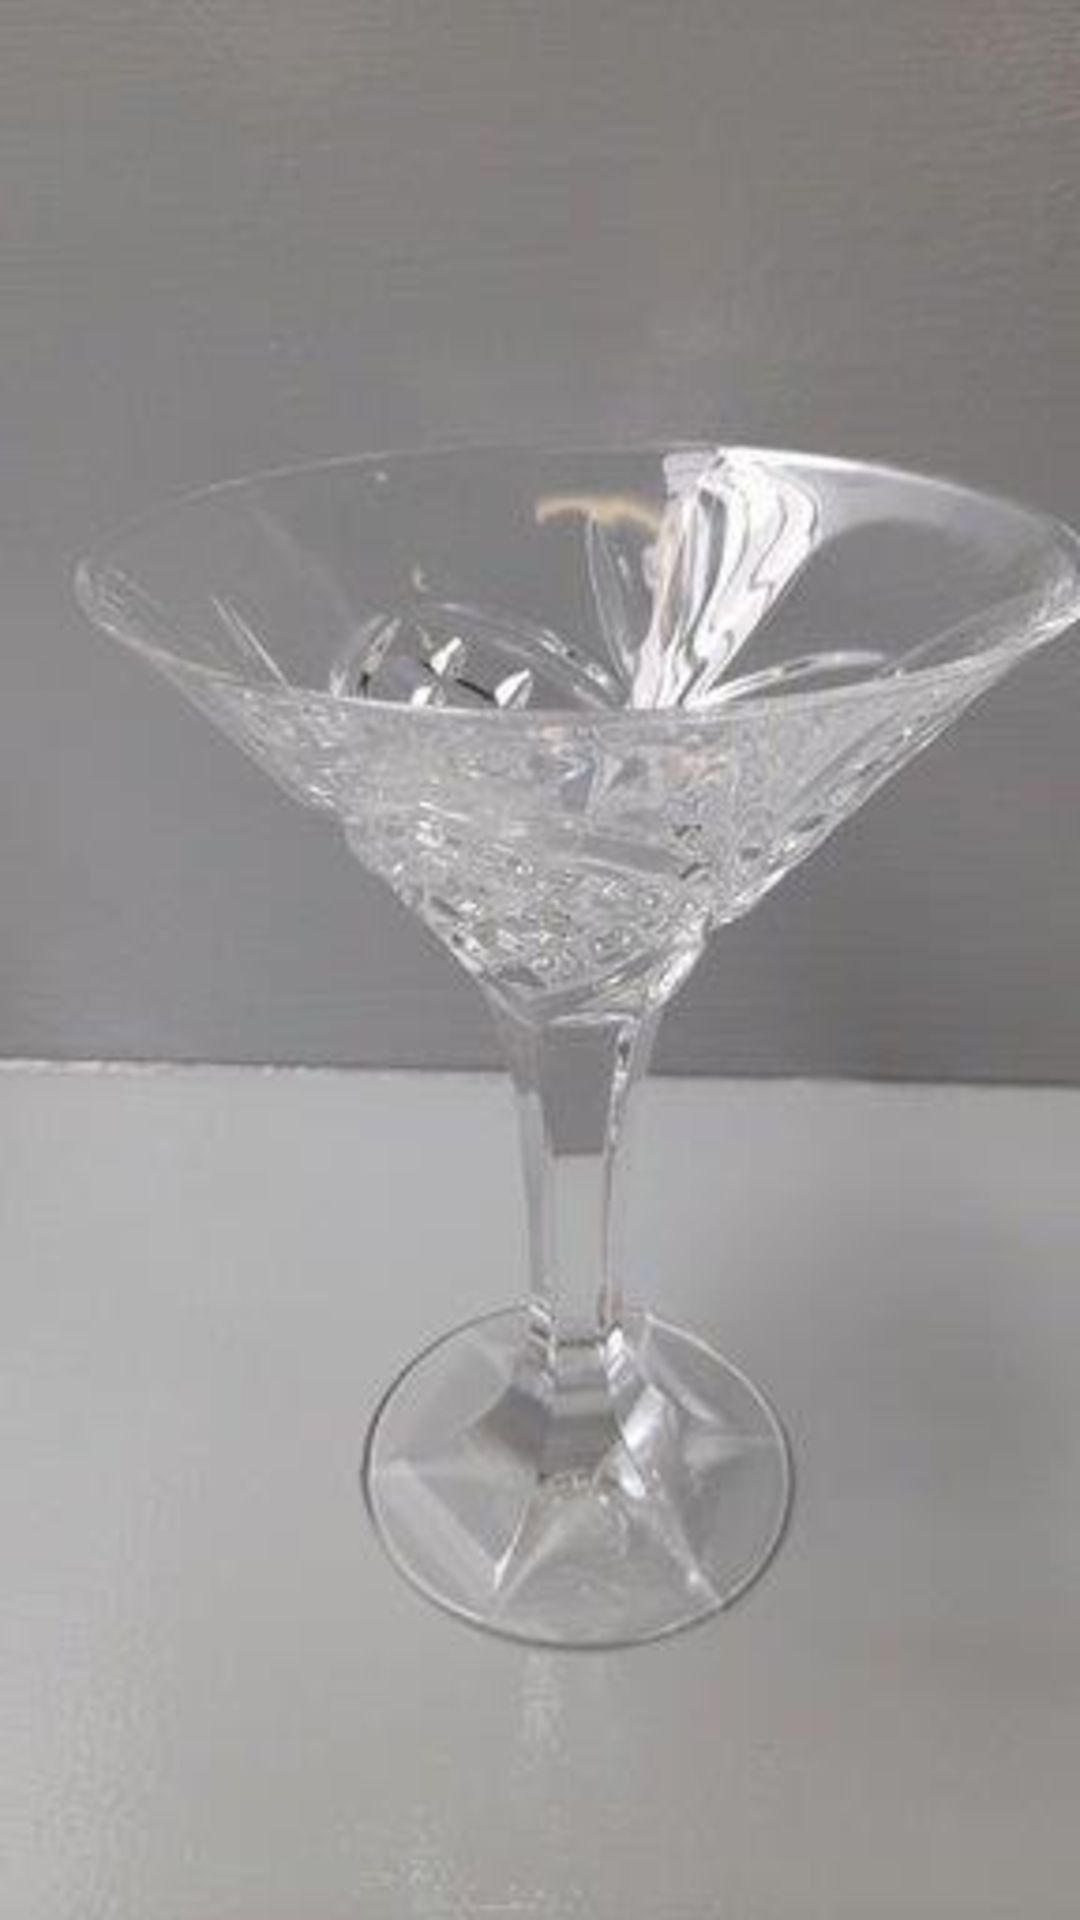 4 Cut Glass Cocktail Glasses - Image 2 of 2